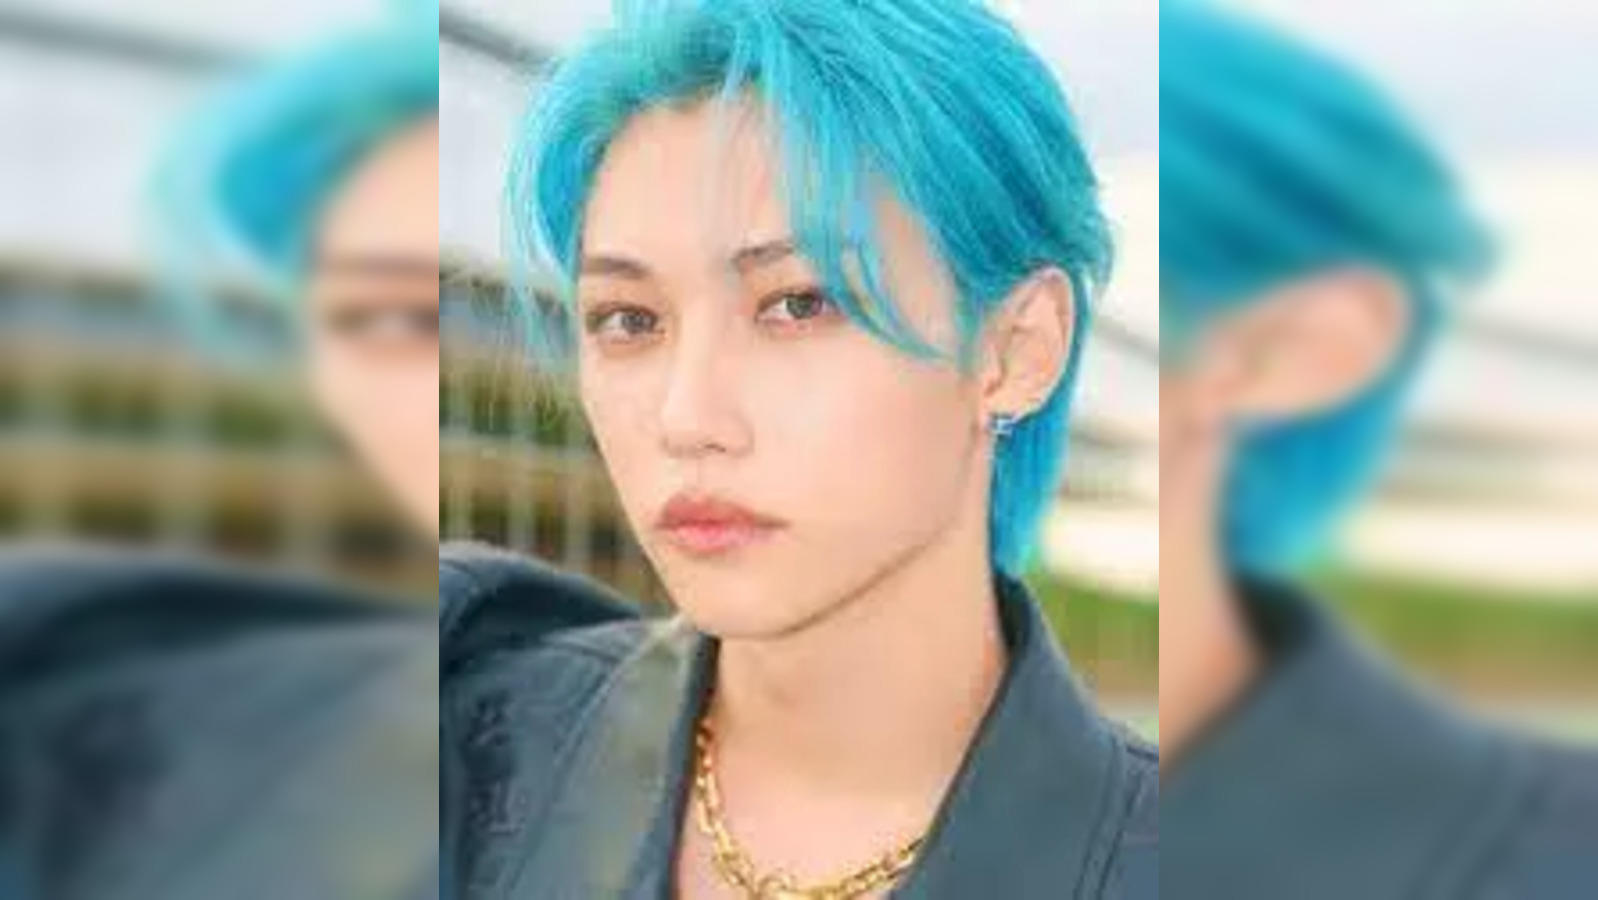 Louis Vuitton welcomes its newest house ambassador, Felix from Stray Kids -  Times of India